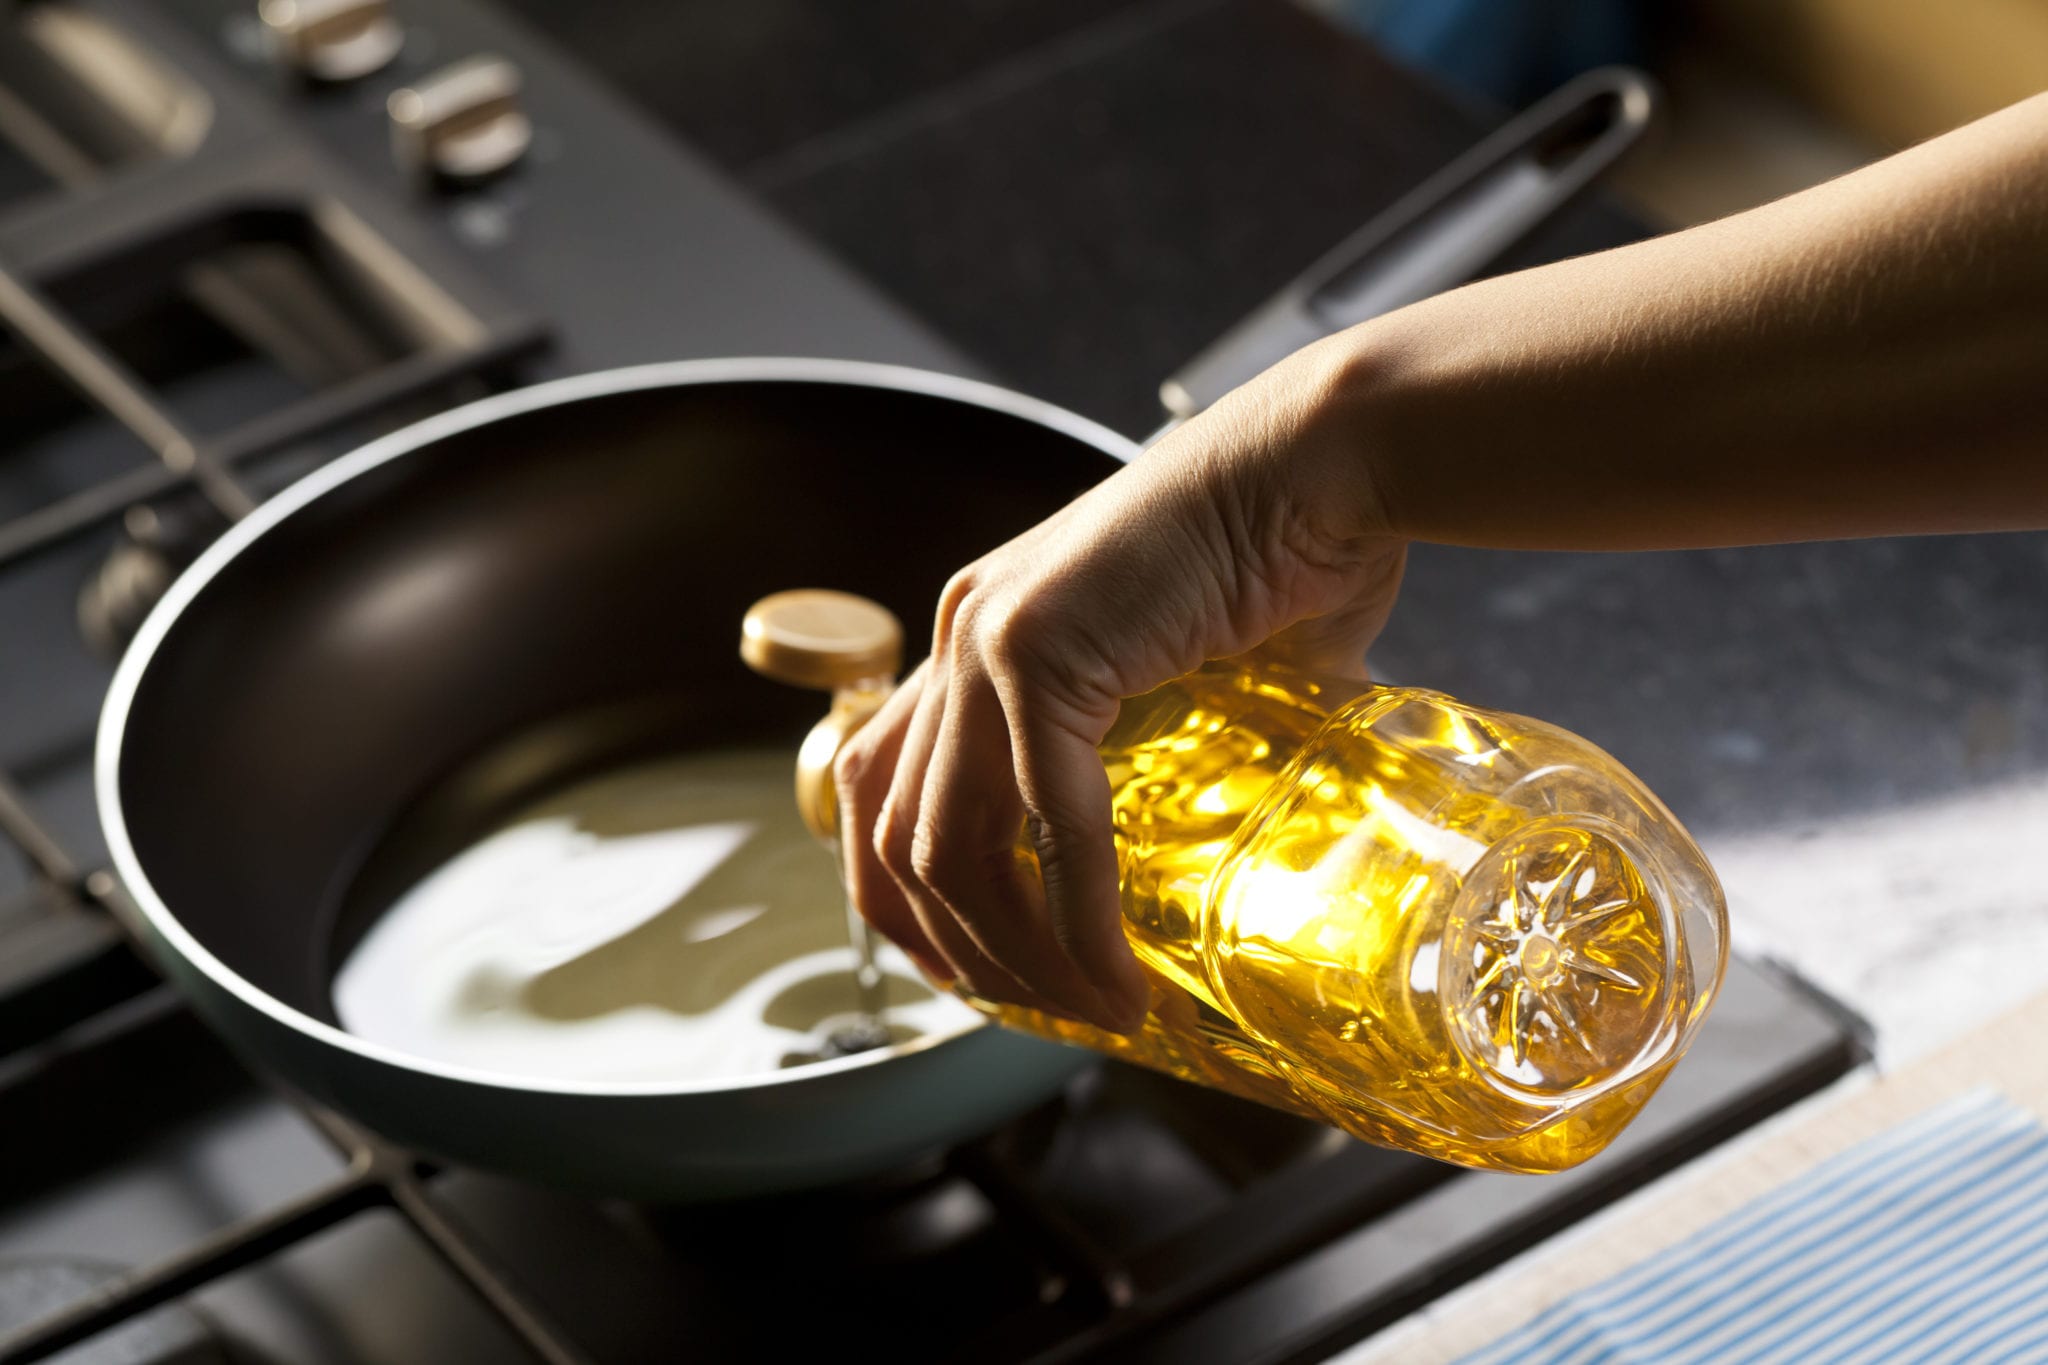 How to Dispose of Used Cooking Oil in Your Home